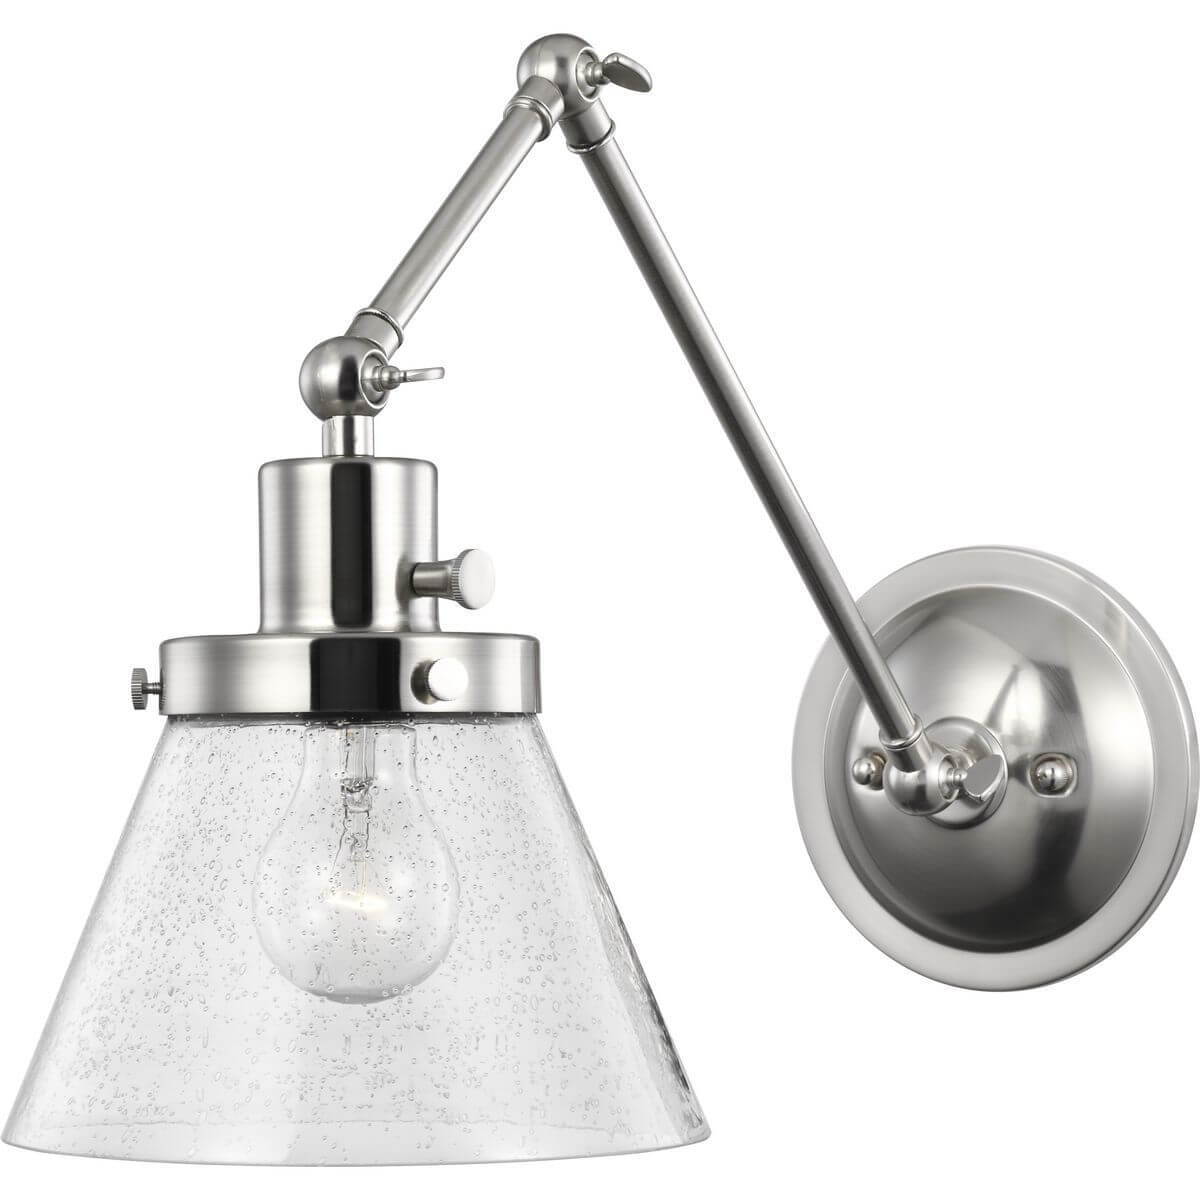 Progress Lighting Hinton 1 Light 14 inch Tall Swing Arm Wall Light in Brushed Nickel with Clear Seeded Glass P710094-009